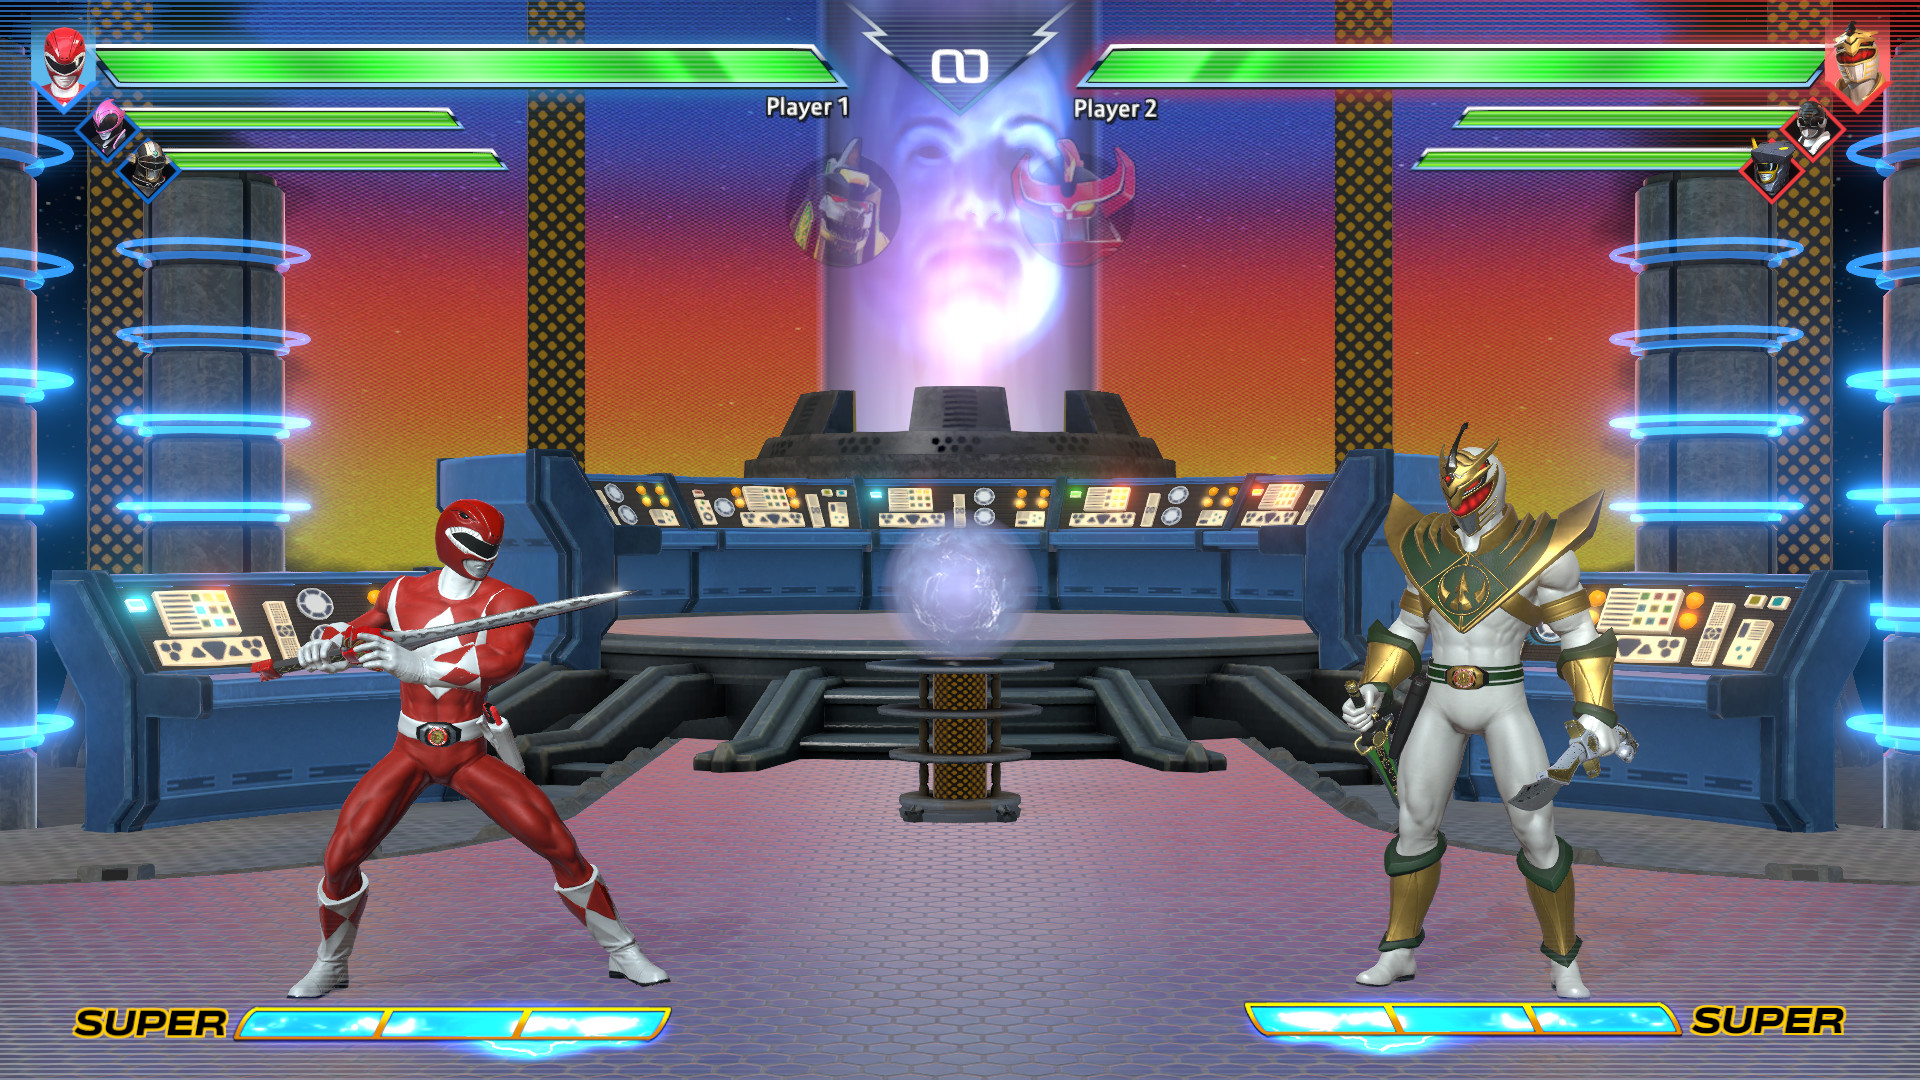 Power Rangers: Battle for the Grid Free Download